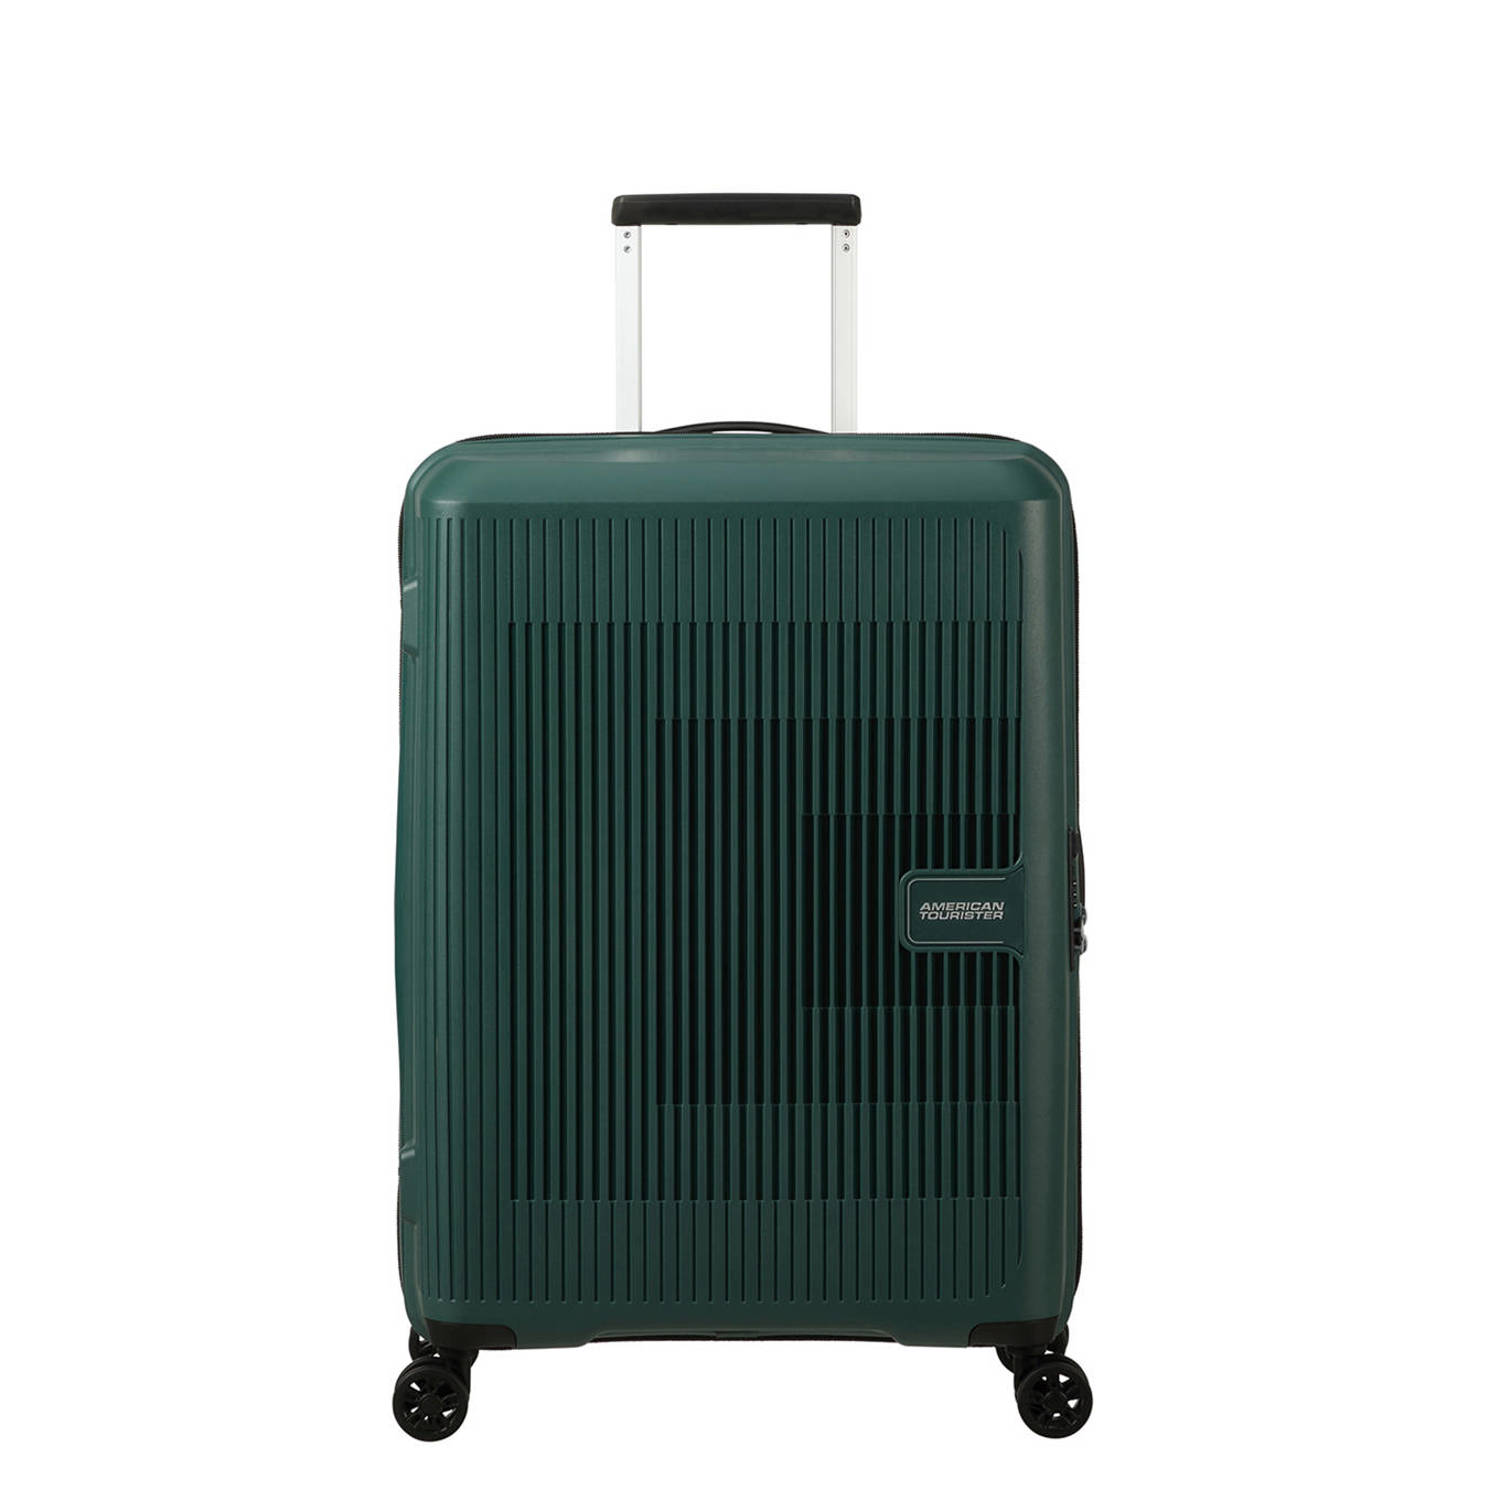 American Tourister trolley Aerostep 67 cm. Expandable donkergroen